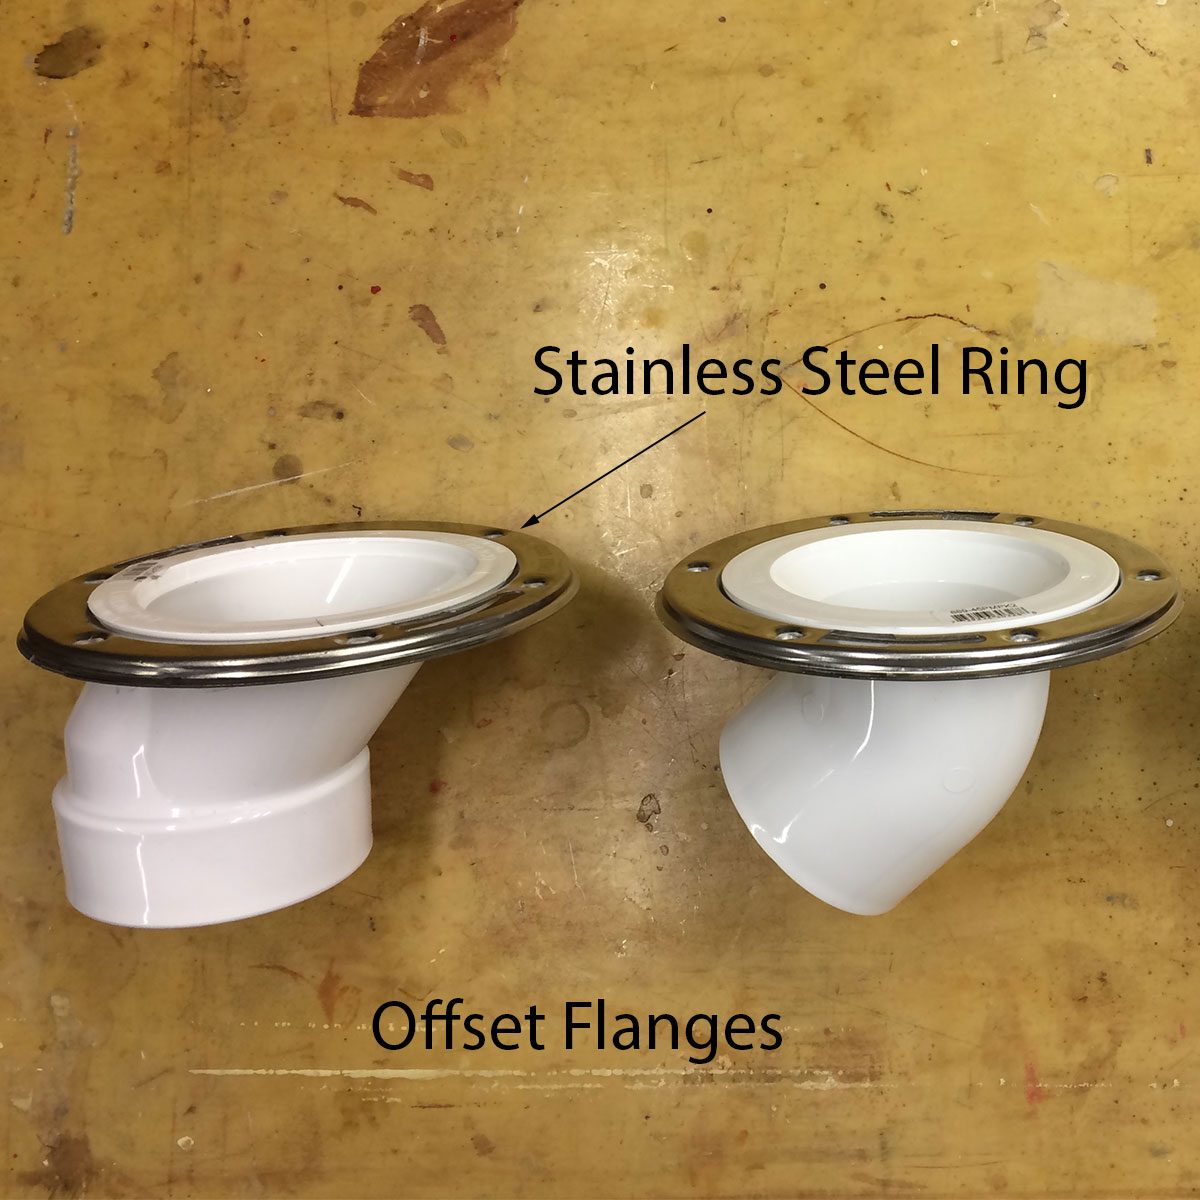 offset toilet flanges with stainless steel rings